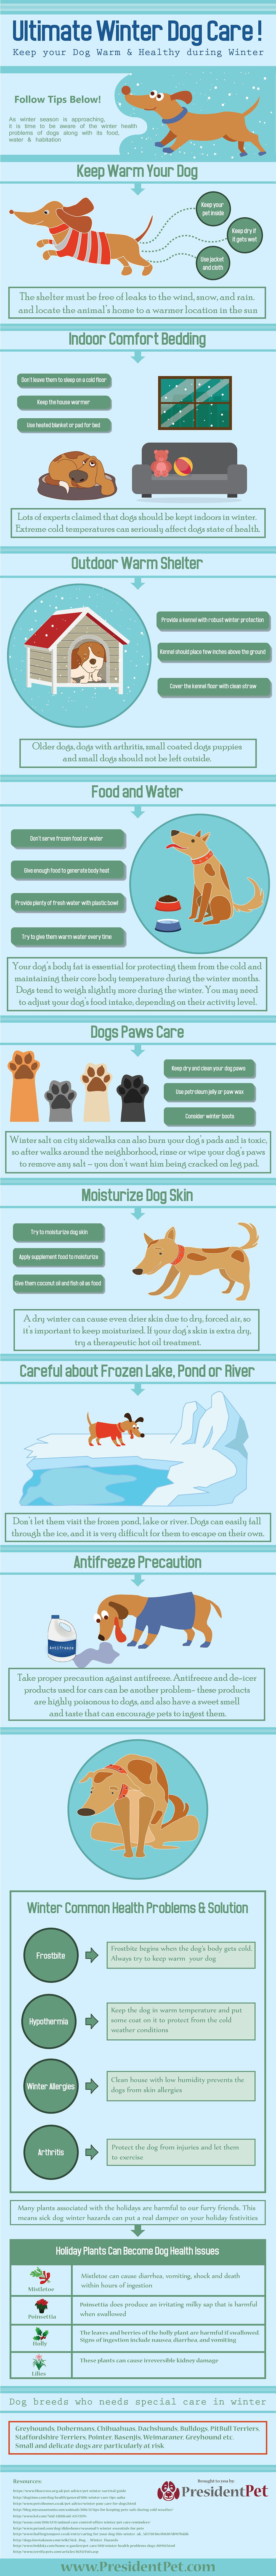 Ultimate Winter Dog Care Guide by PresidentPet